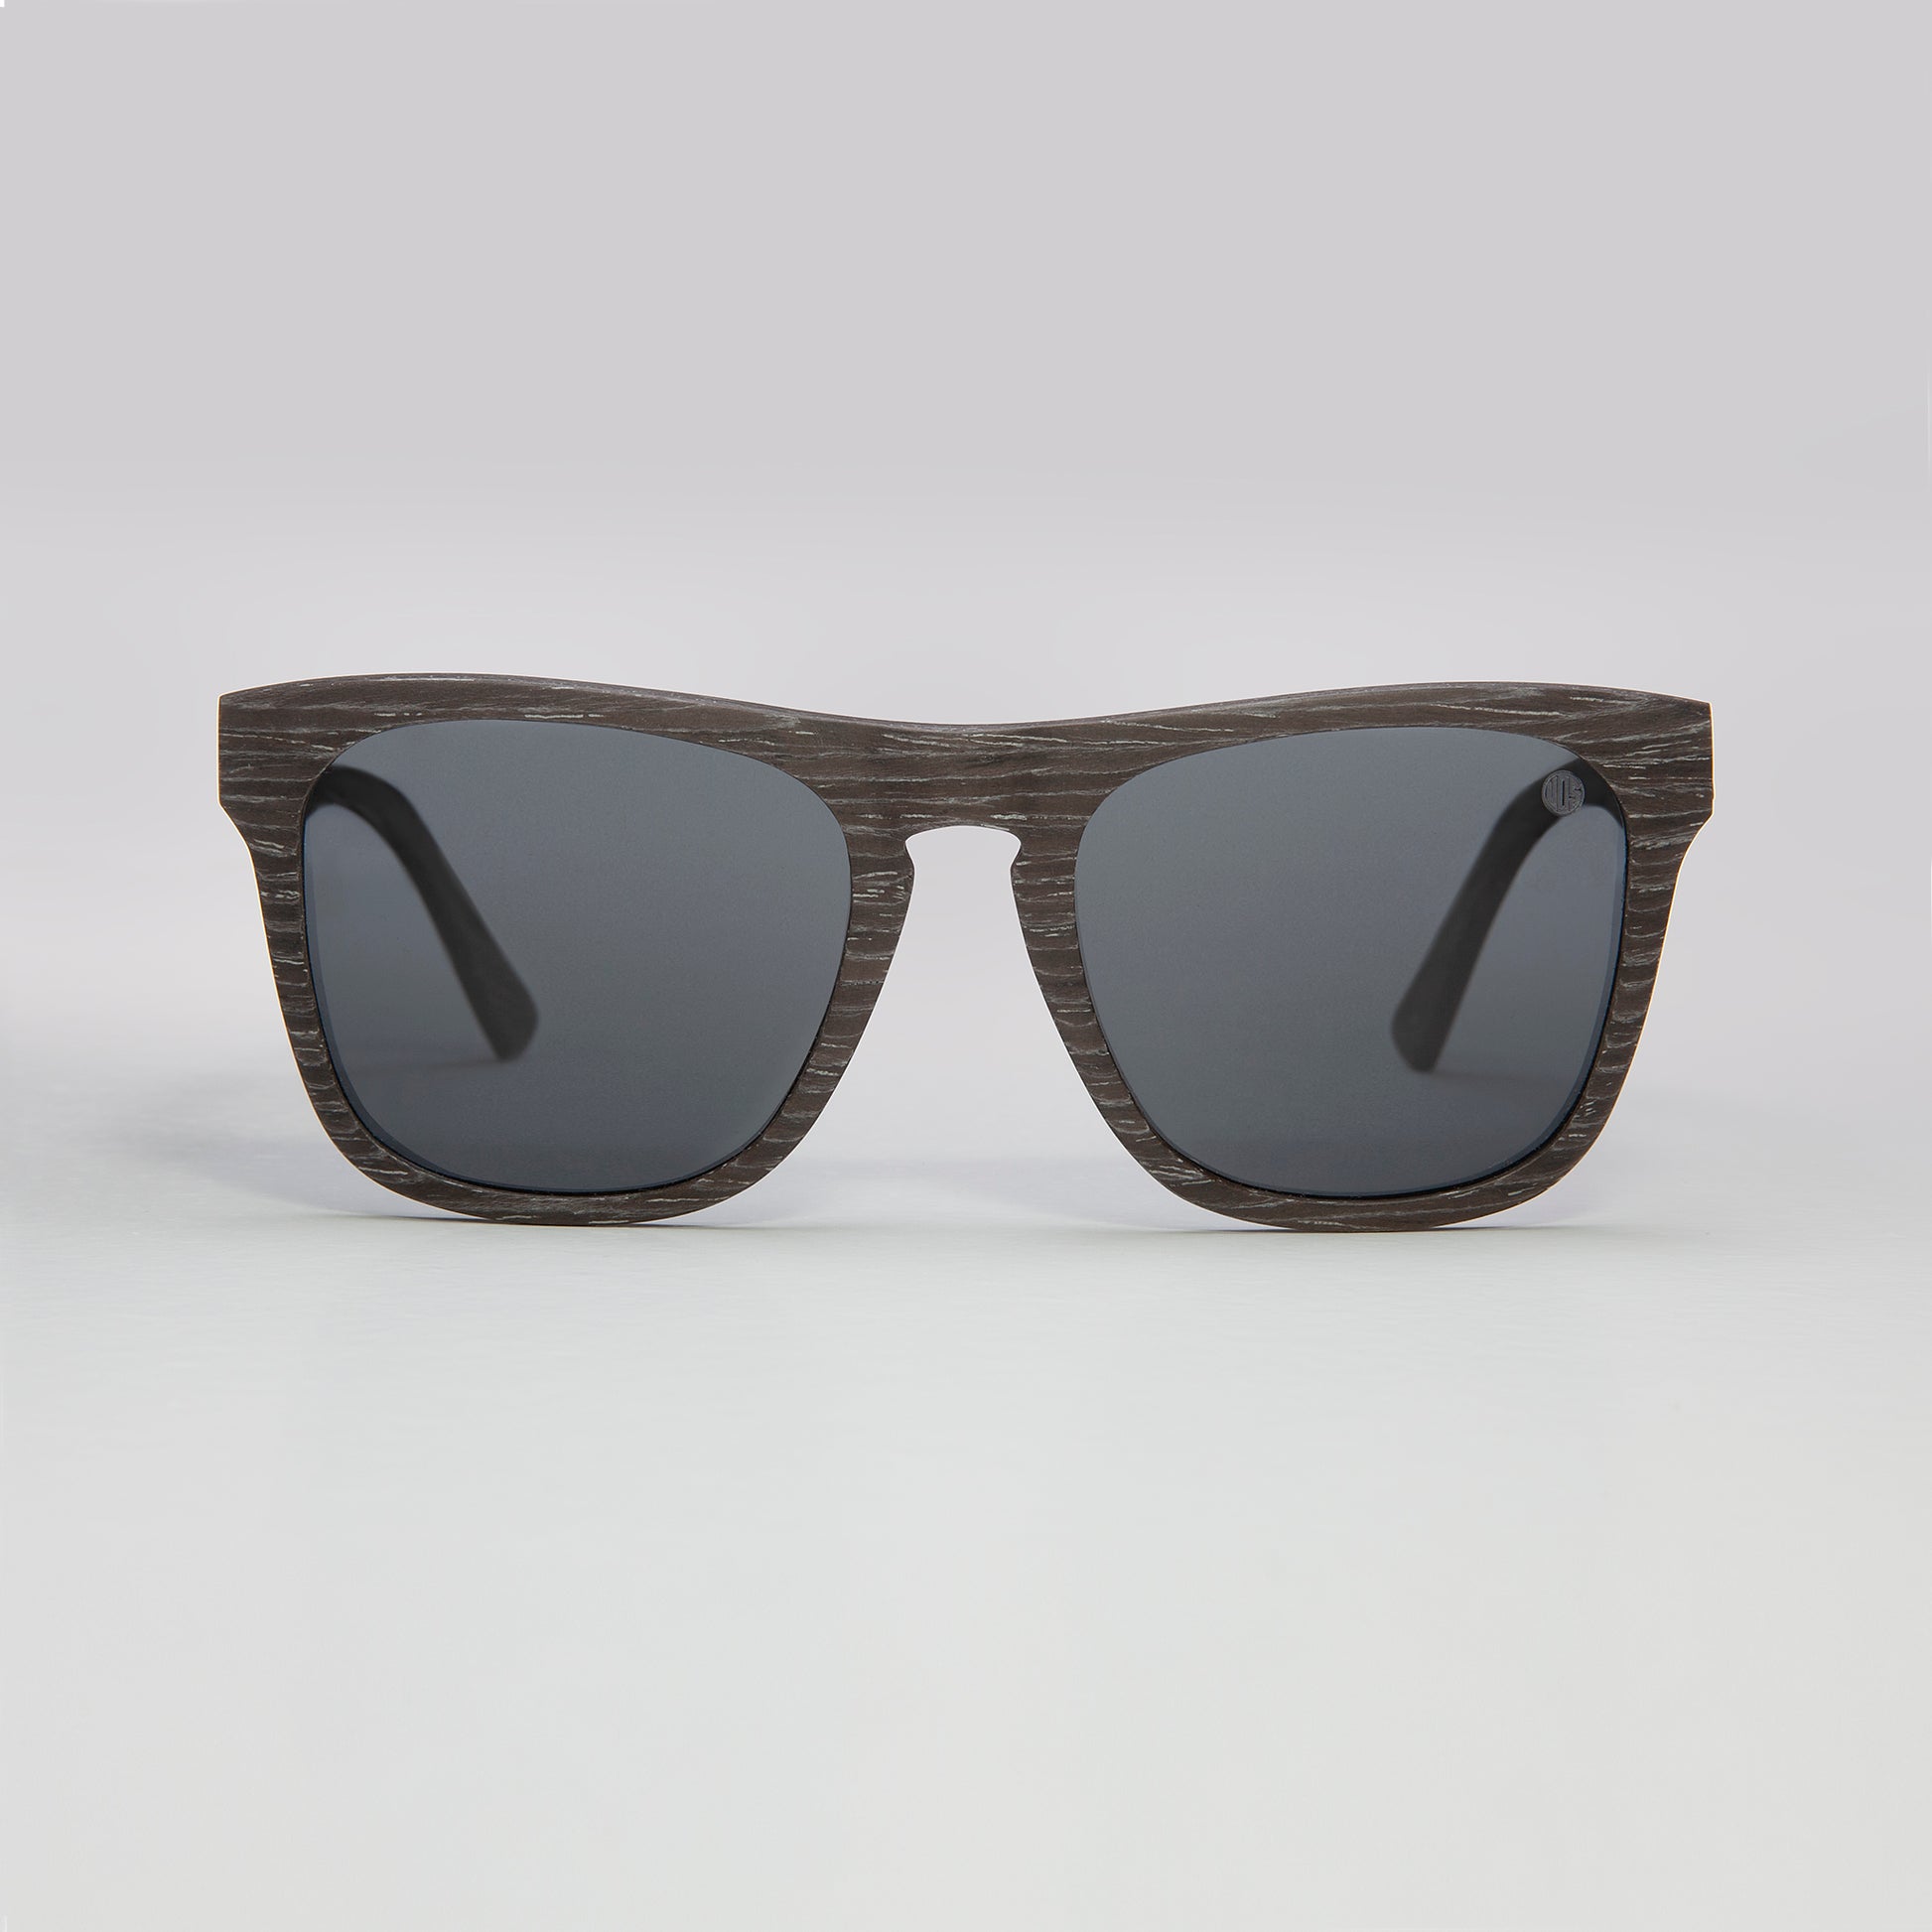 Polarised Wooden Sunglasses with Wooden Frames Form Men and Women